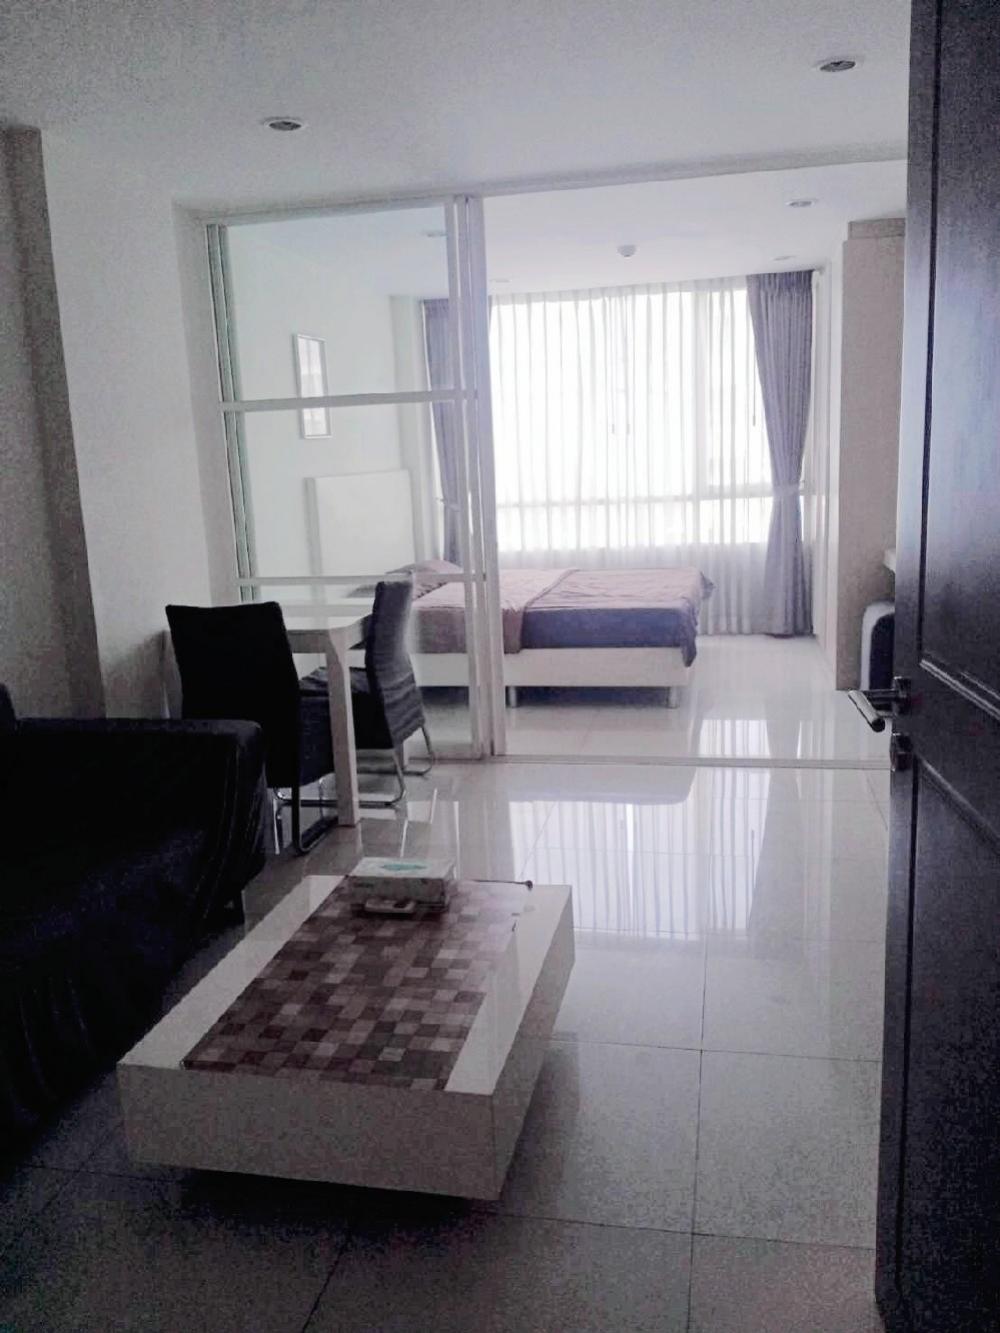 For RentCondoPattanakan, Srinakarin : Available Condo for rent, Element Srinakarin, 1 bedroom, ready to reserve directly from the owner, price only 8,000 baht.